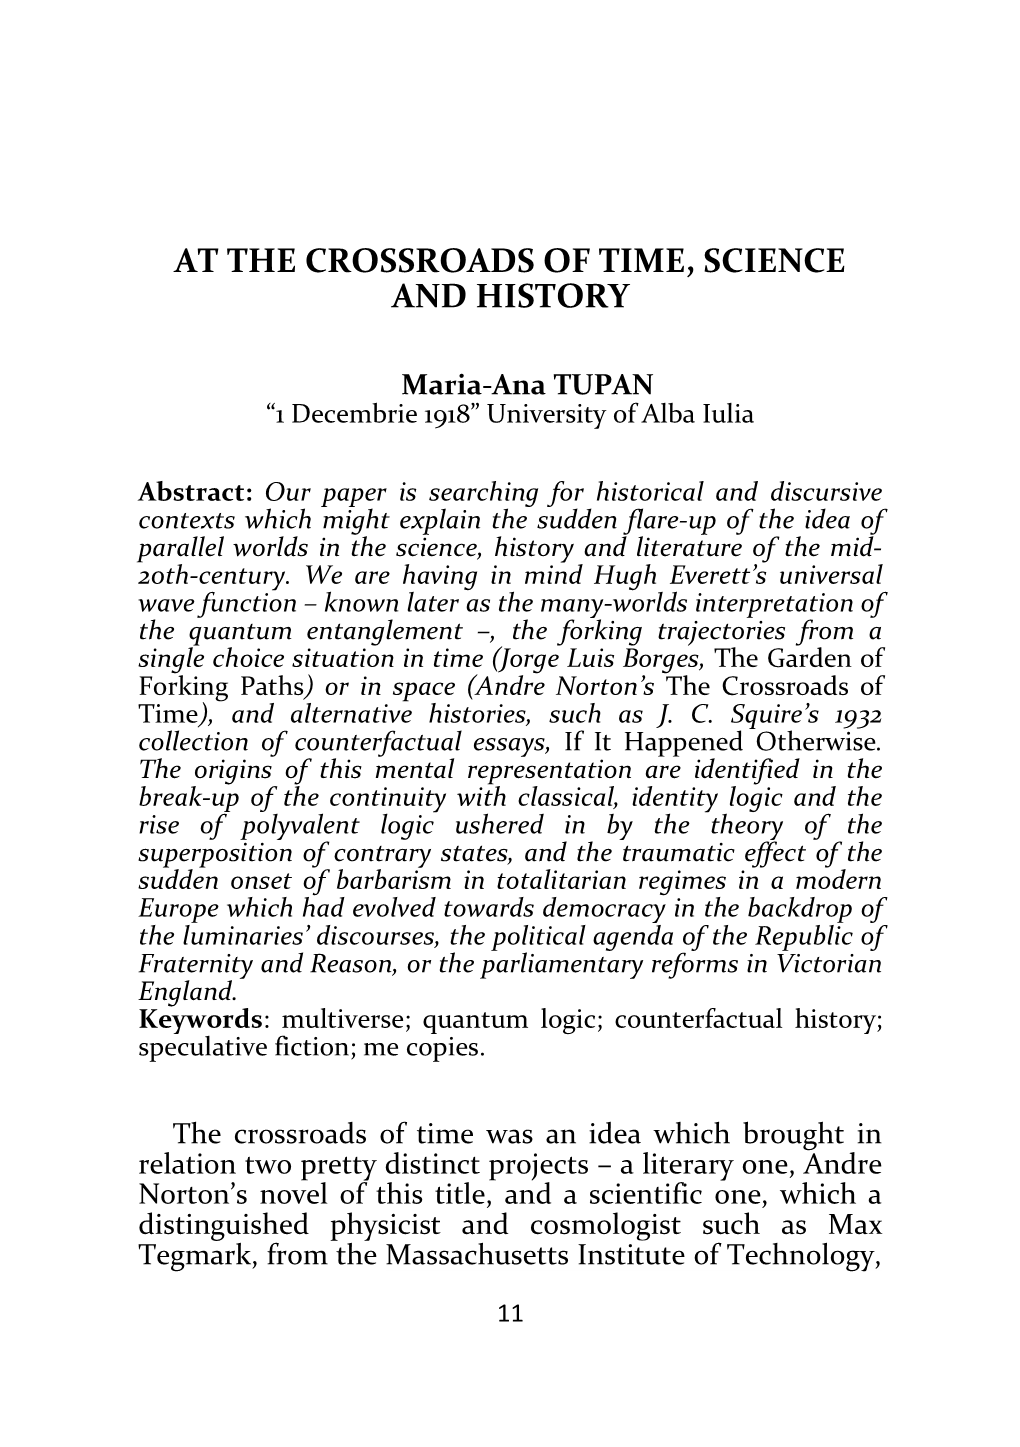 At the Crossroads of Time, Science and History